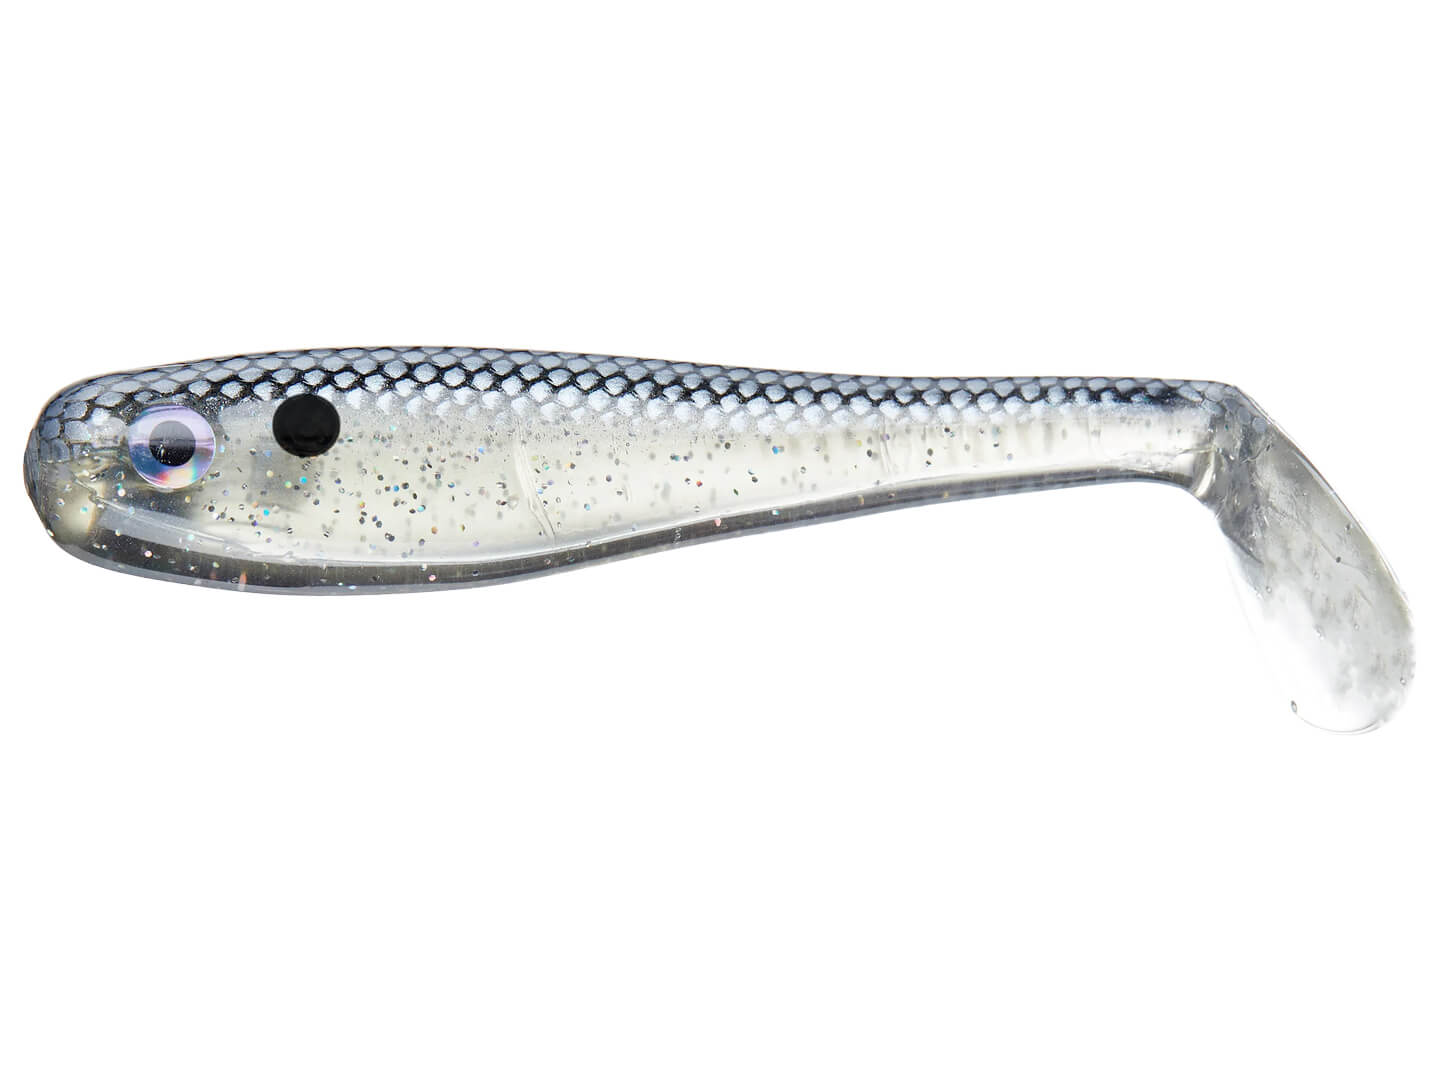  Paddle Tail Swimbaits, Soft Plastic Lures For Bass